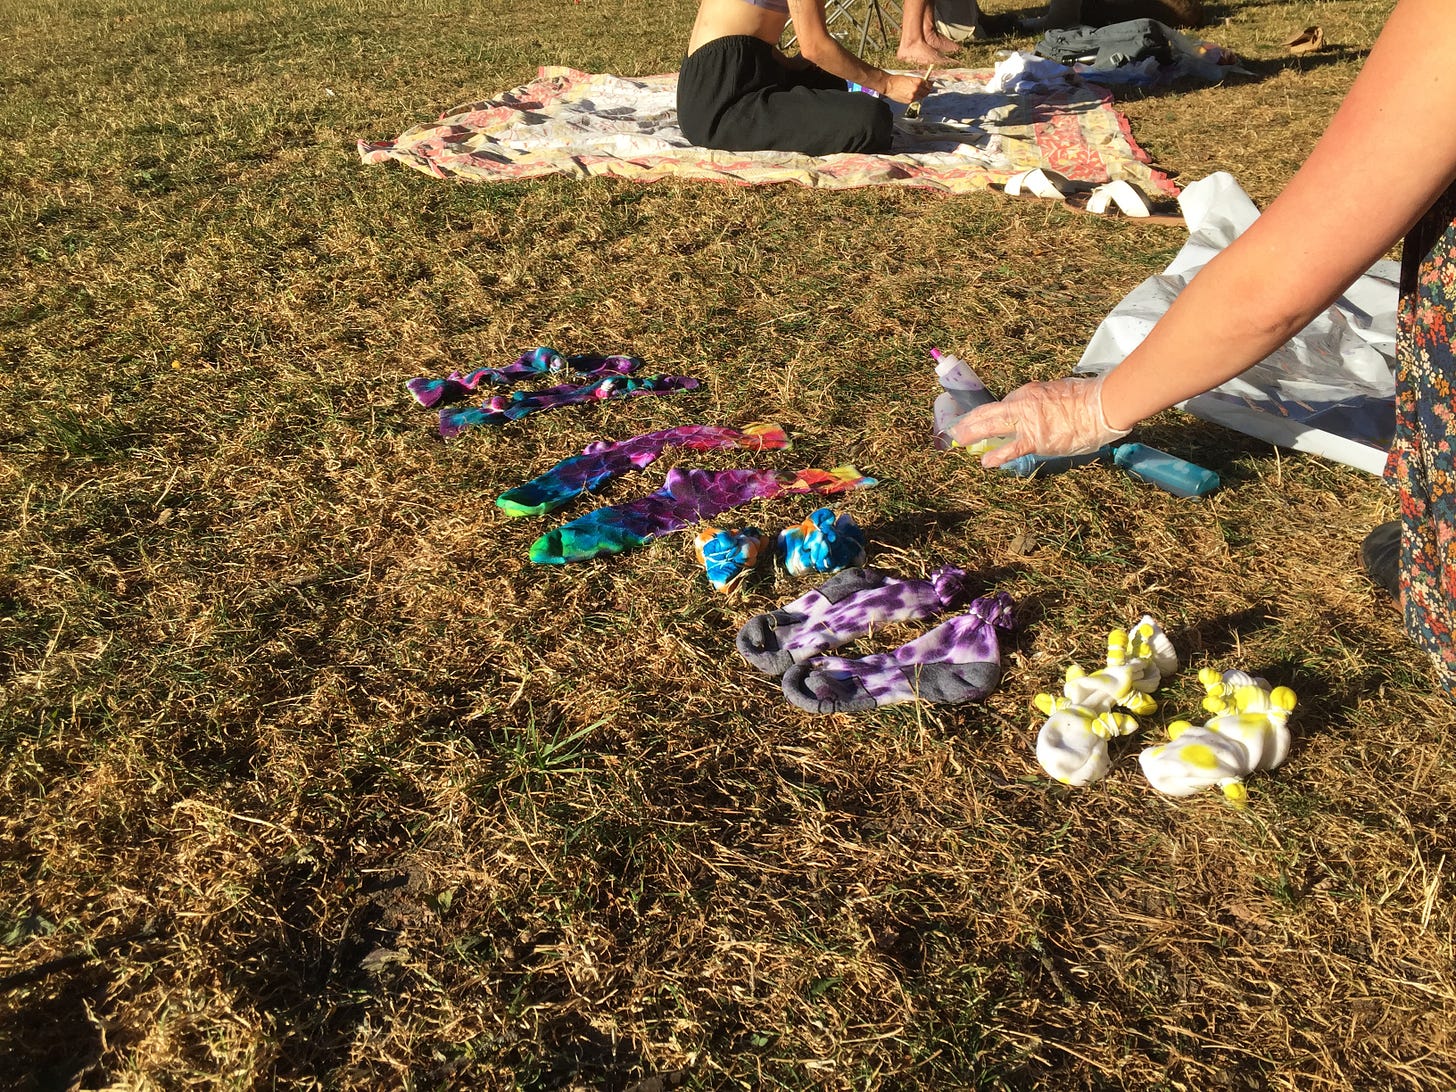 several pairs of tie-dyed socks lay on grass that looks dry and yellow. A gloved hand holding a bottle of dye is in the right side of the photo. In the background, people's legs are visible sitting on a picnic blanket.